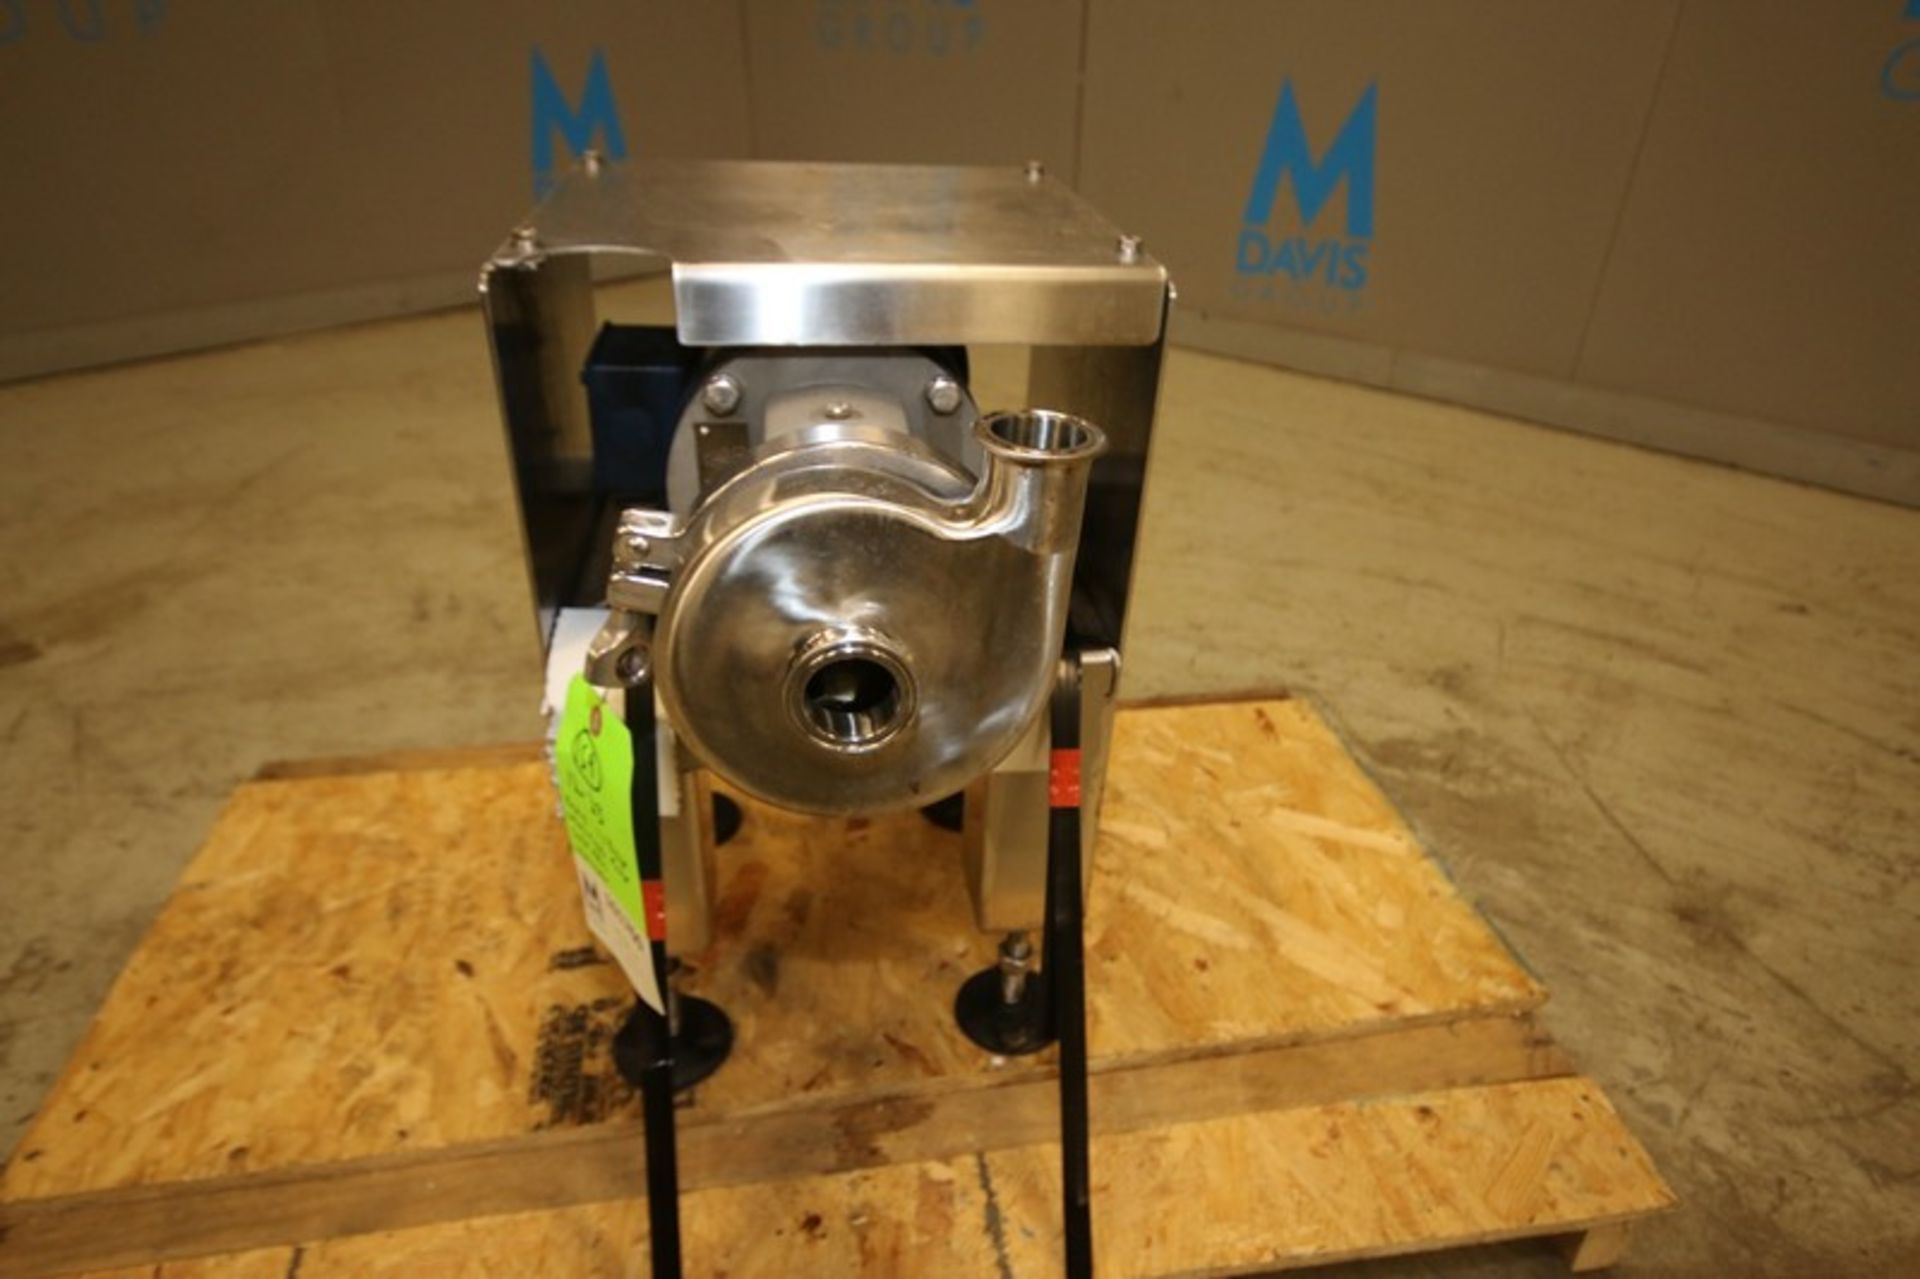 Ampco 1.75 hp Centrifugal Pump, Model C+114-D-056C SN 1931908-5-1, with 1.5" CT S/S Head, 3450 rpm - Image 2 of 5